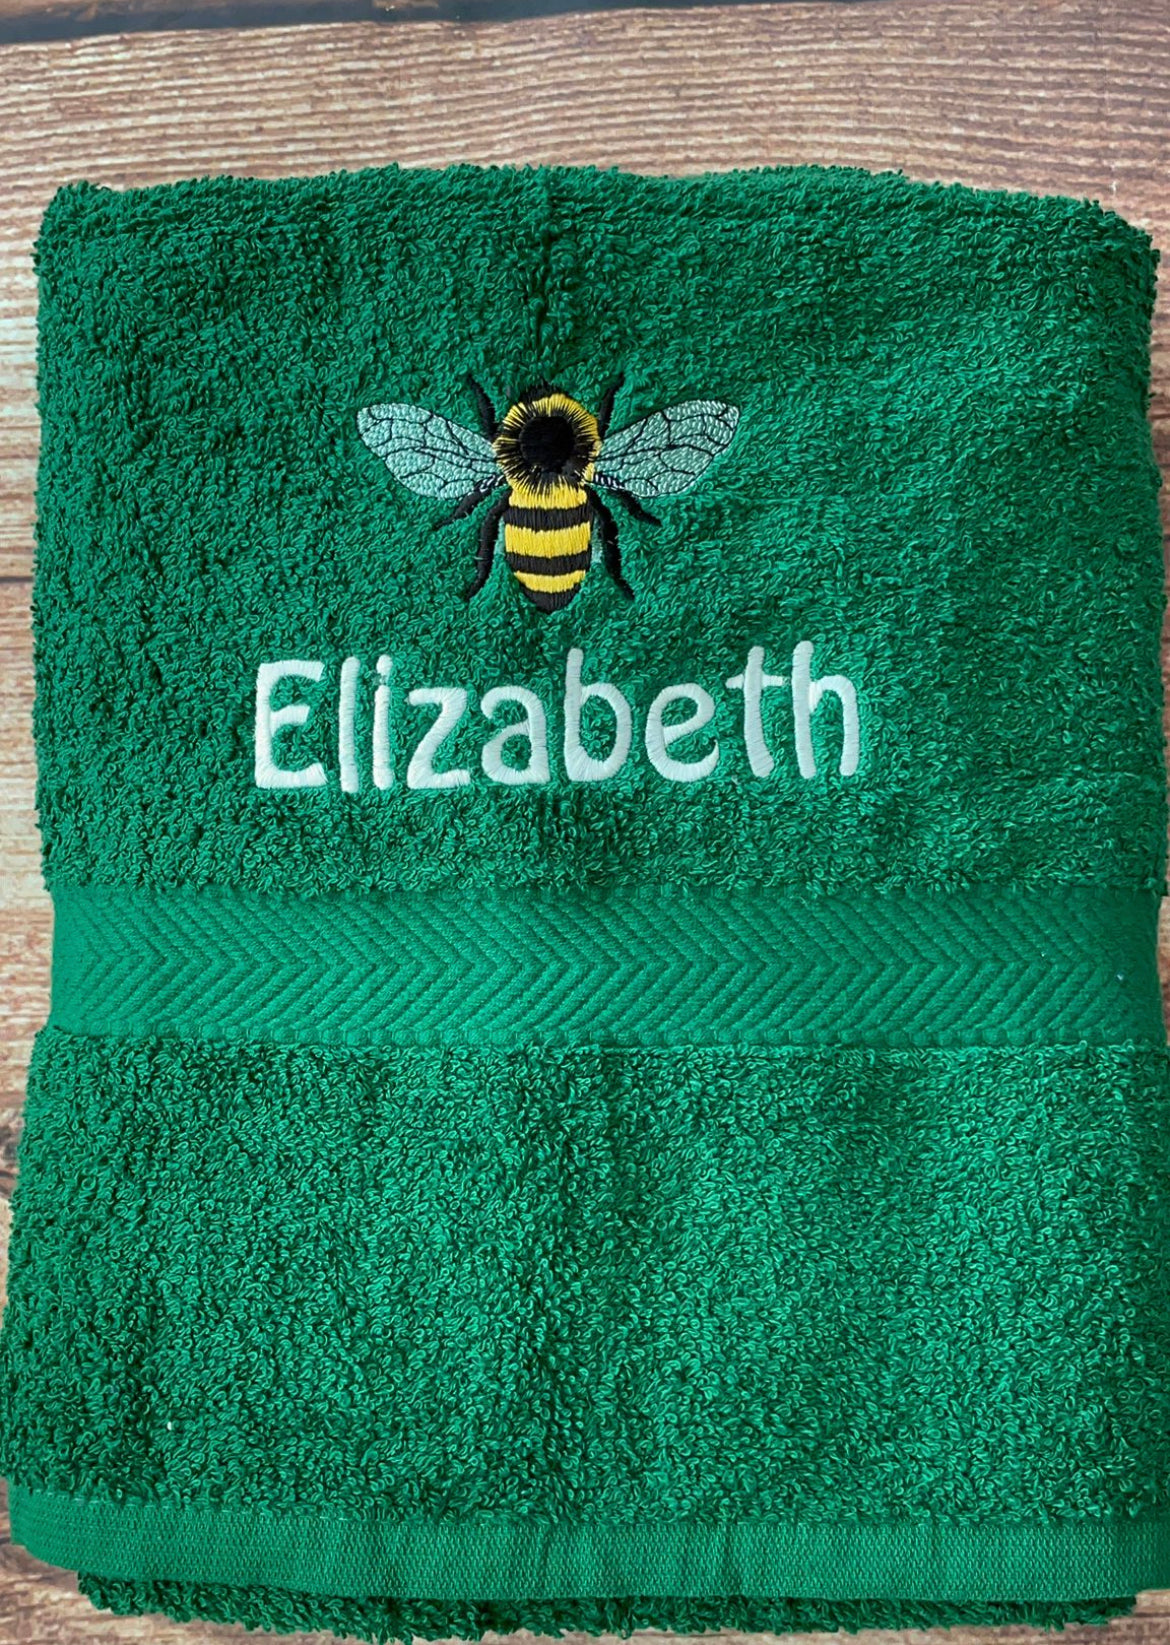 Embroidered personalised swimming or sports towel. Ideal gift // bee